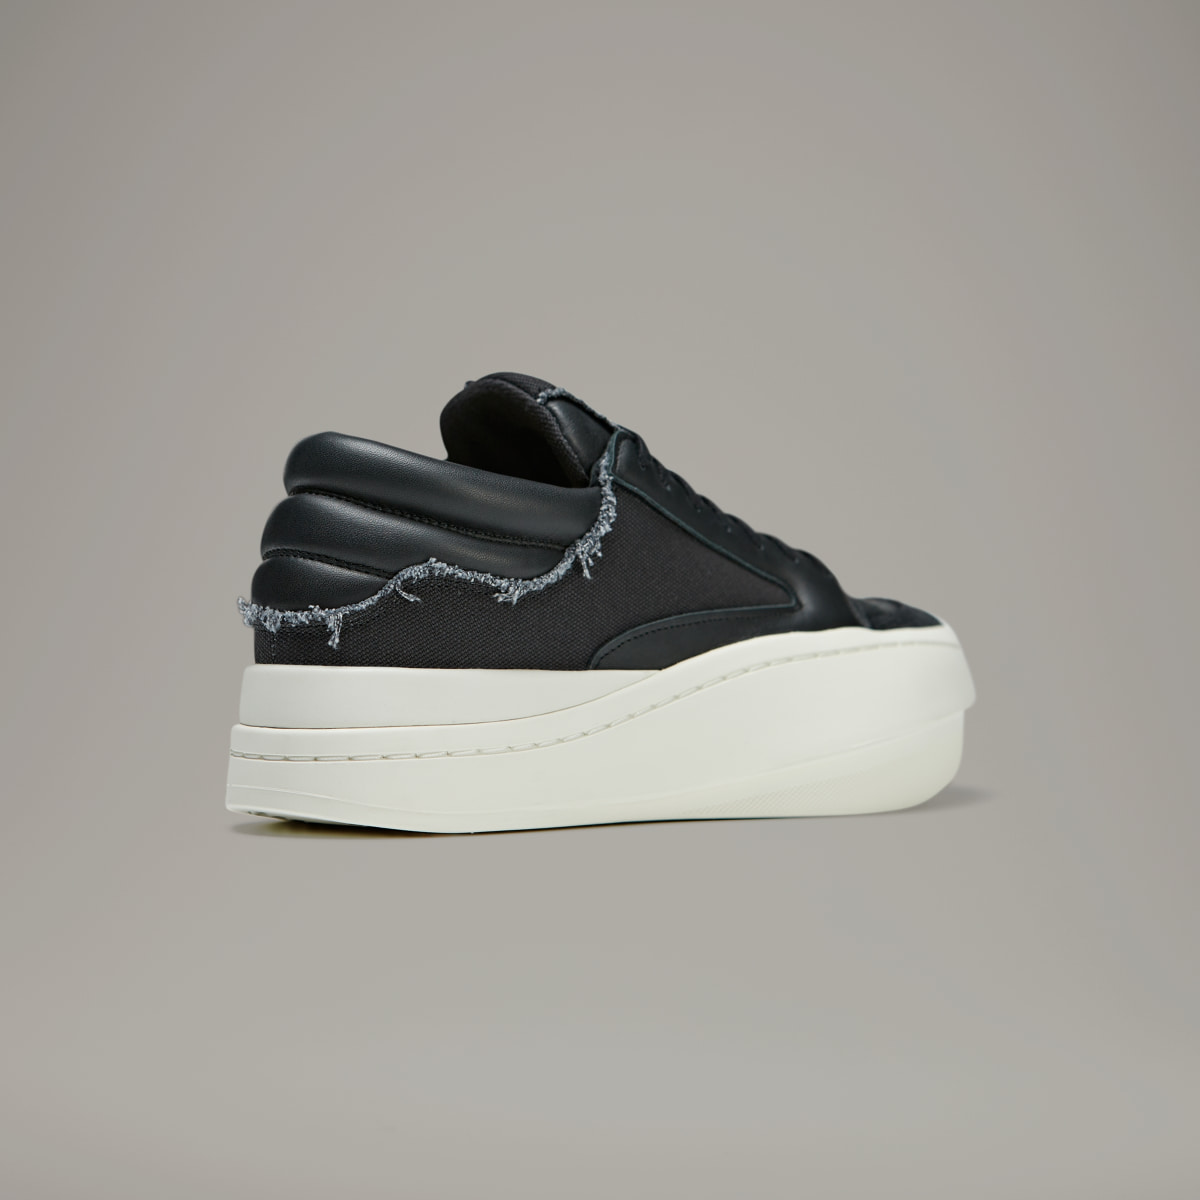 Adidas Y-3 Centennial Low Shoes. 7